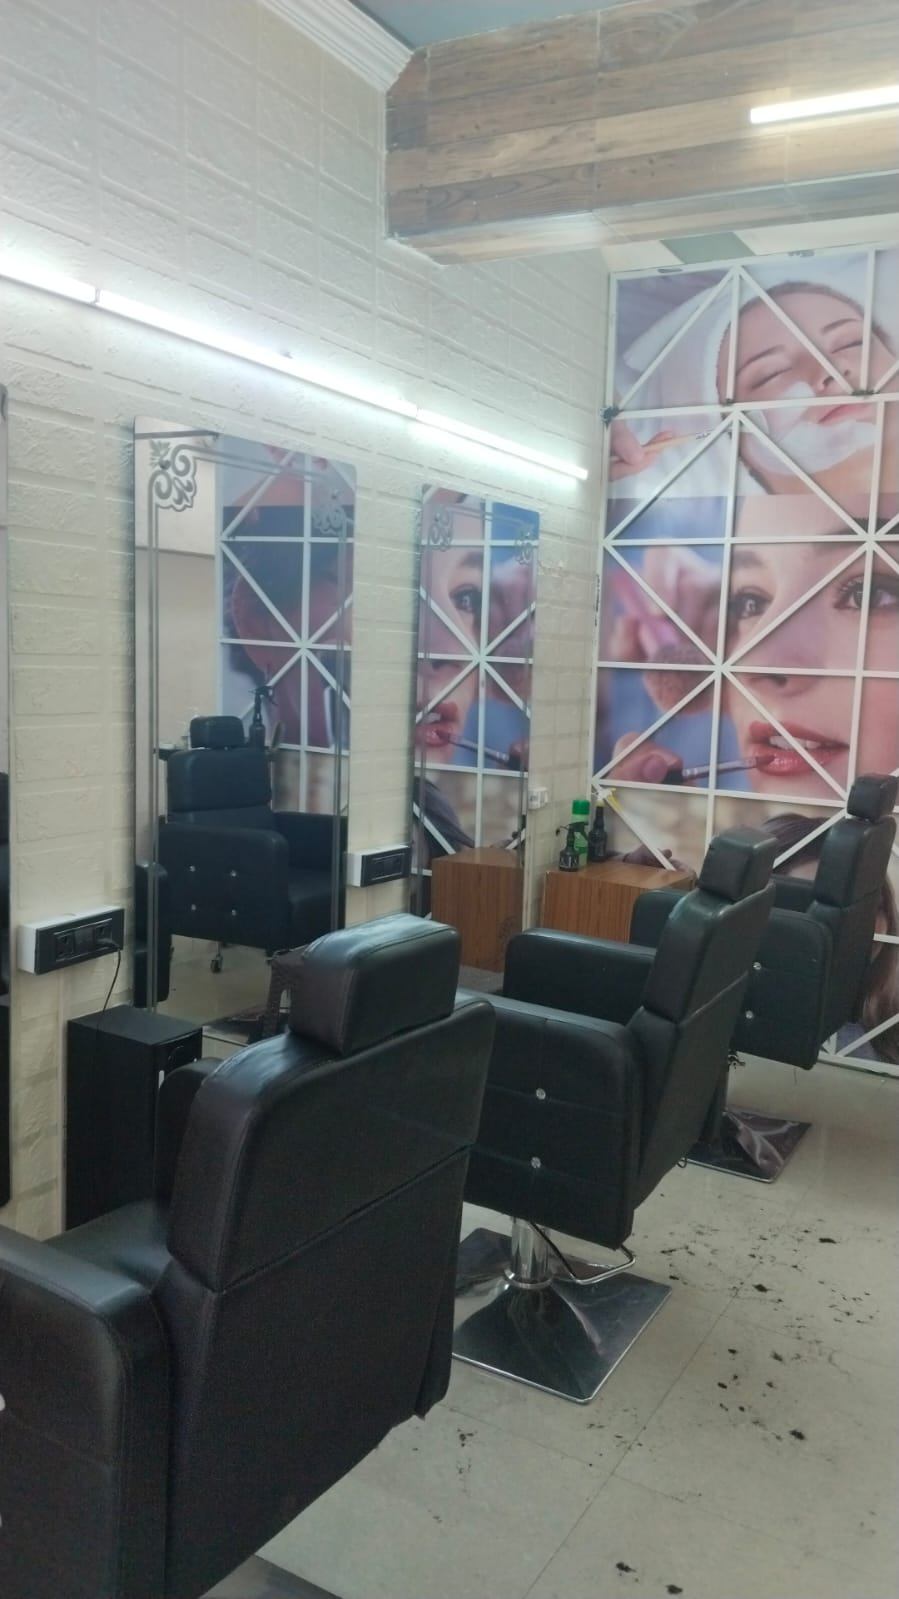 Rent Office/ Shop, 300 sq ft carpet area, Furnished for rent @Nehru colony 